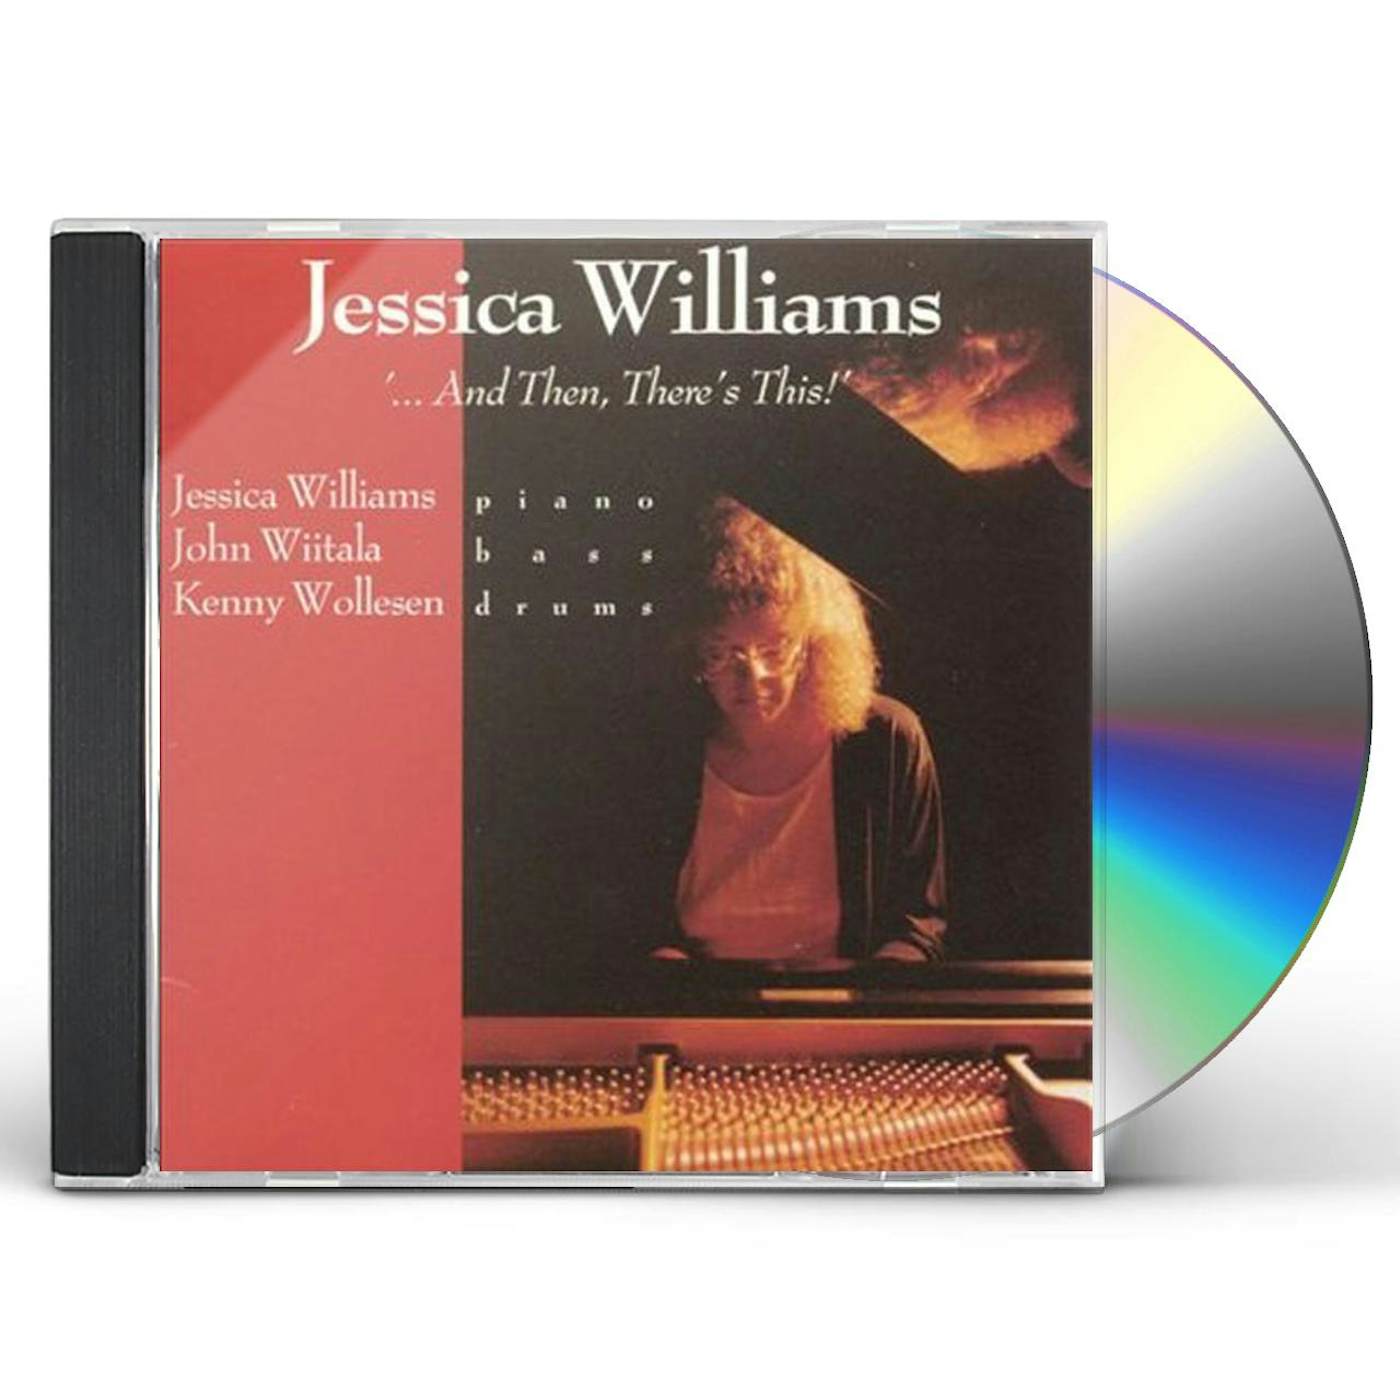 Jessica Williams & THEN THERE'S THIS CD